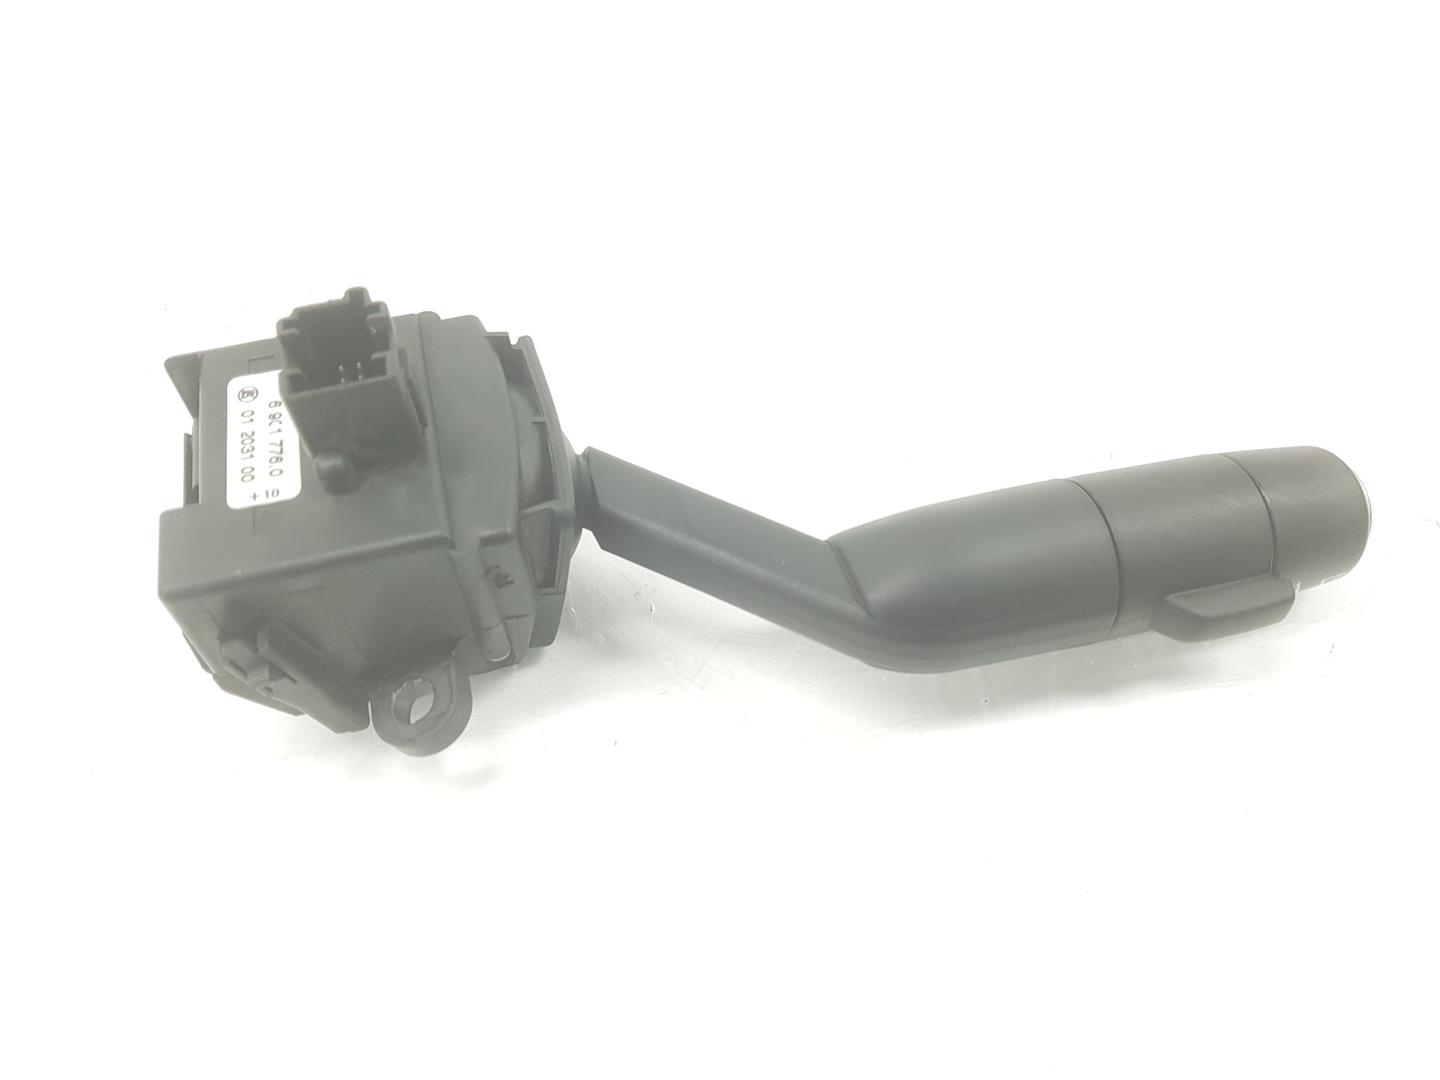 LAND ROVER Range Rover 3 generation (2002-2012) Indicator Wiper Stalk Switch XPE000010WQD, 17A553 19907447